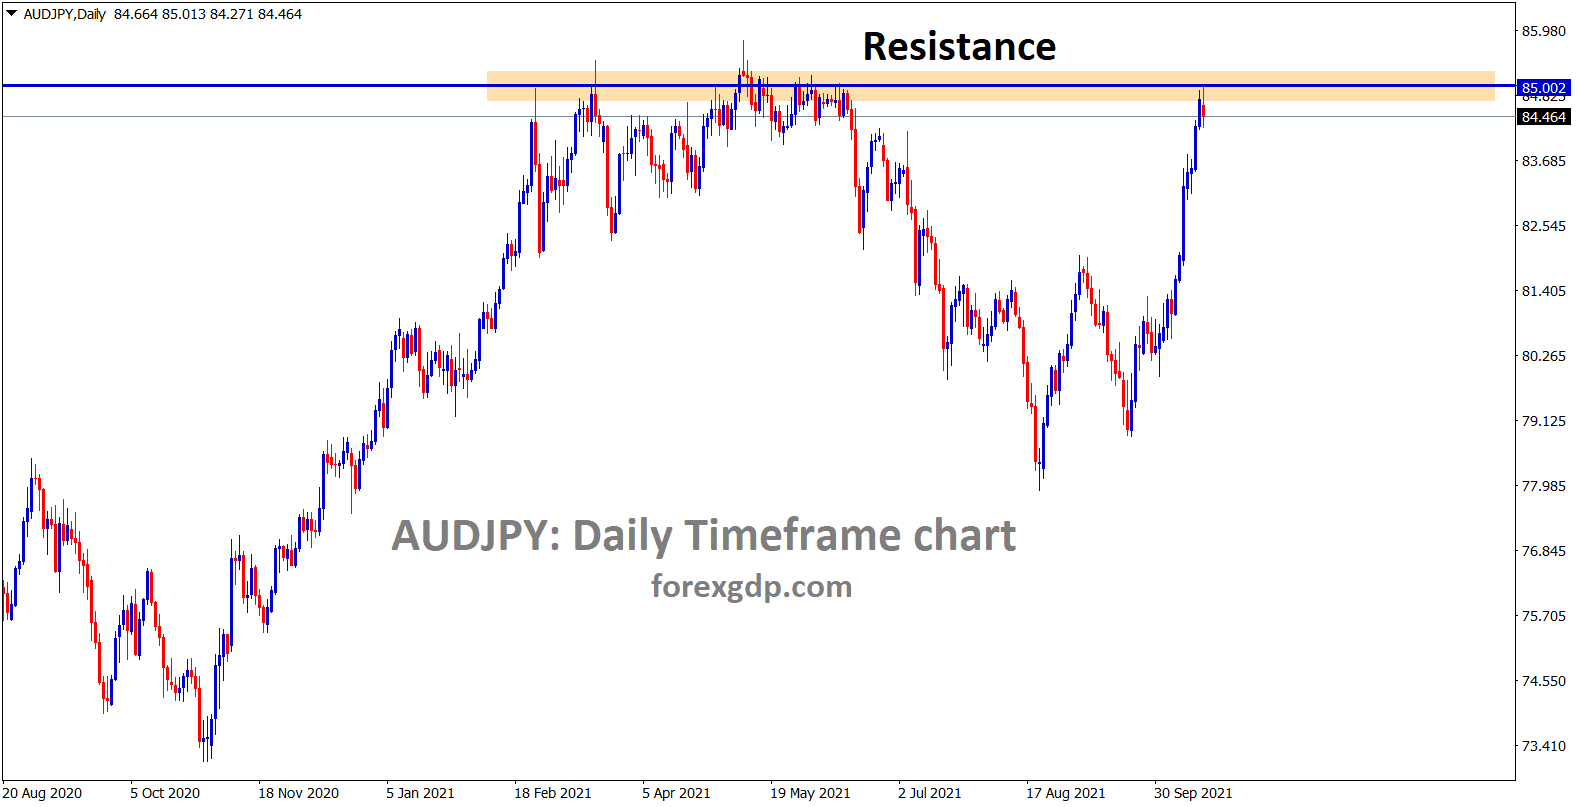 AUDJPY is standing at the resistance area